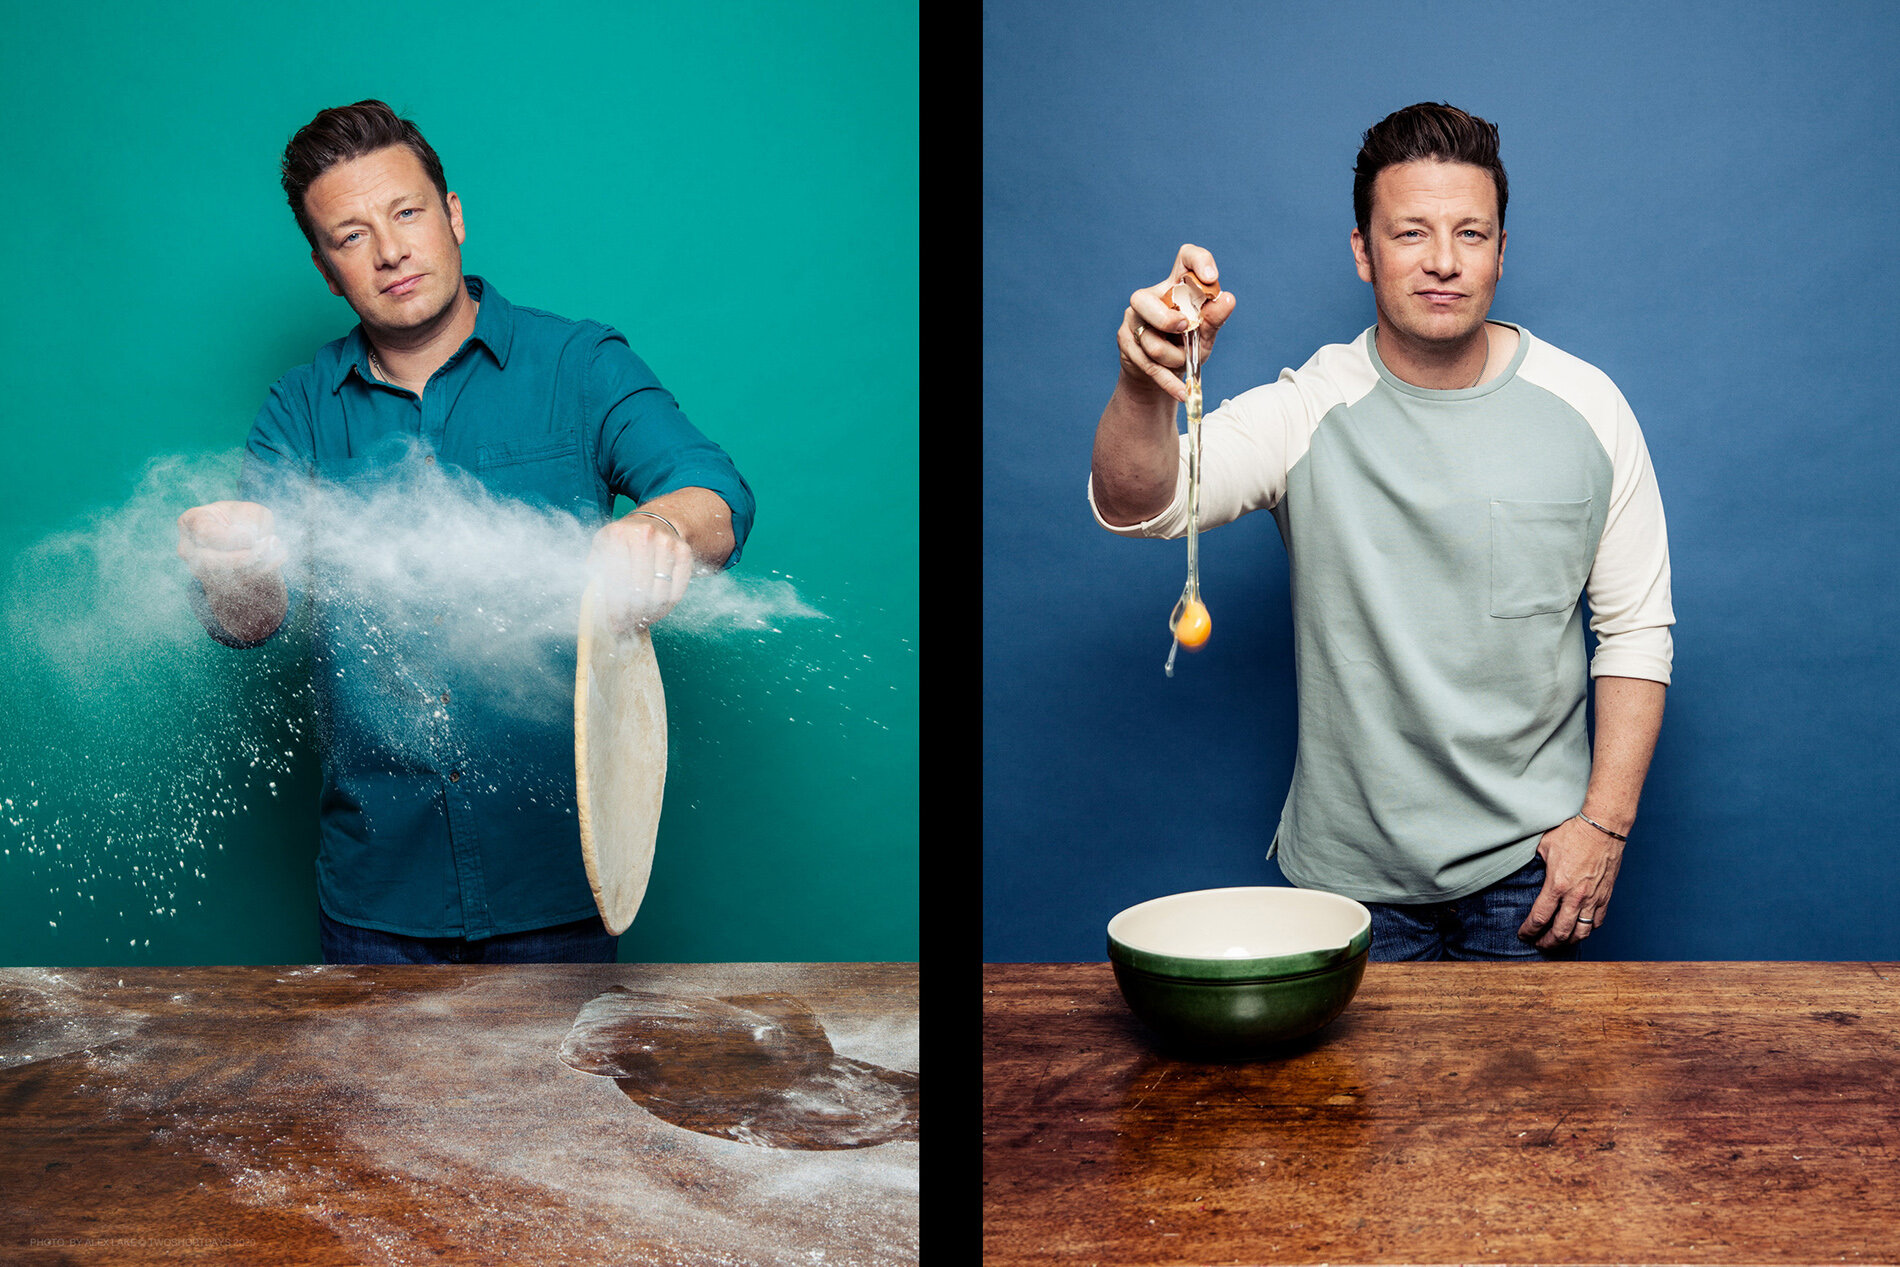 jamie_oliver_photography_copyright_ALEX_LAKE_do_not_reproduce_without_permission_TWOSHORTDAYS.jpg